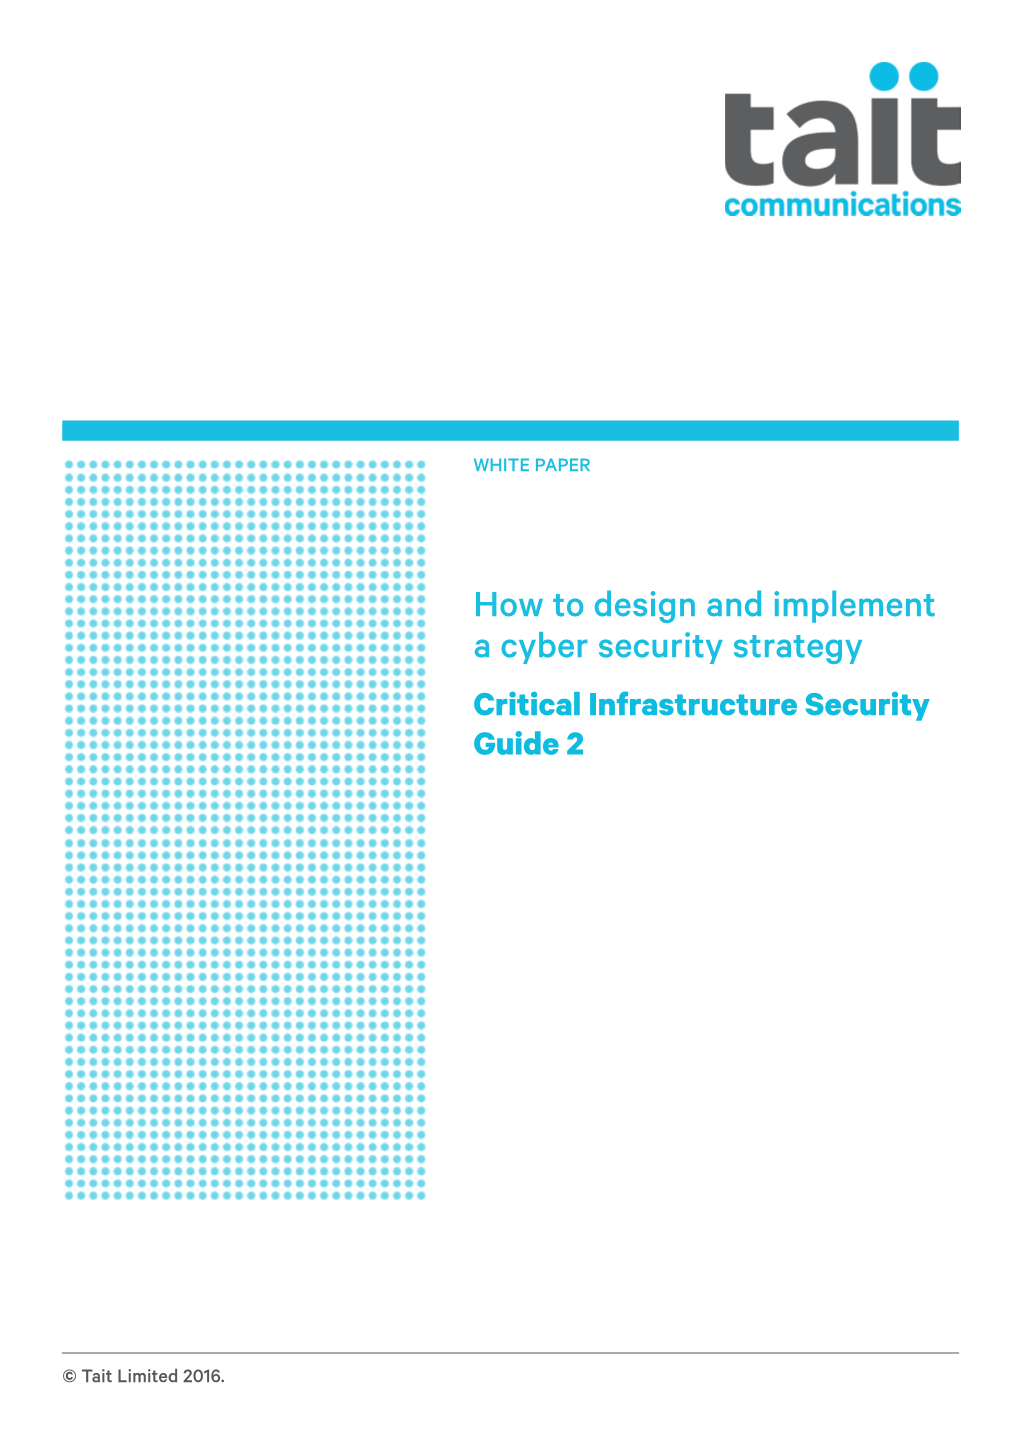 How to Design and Implement a Cyber Security Strategy Critical Infrastructure Security Guide 2